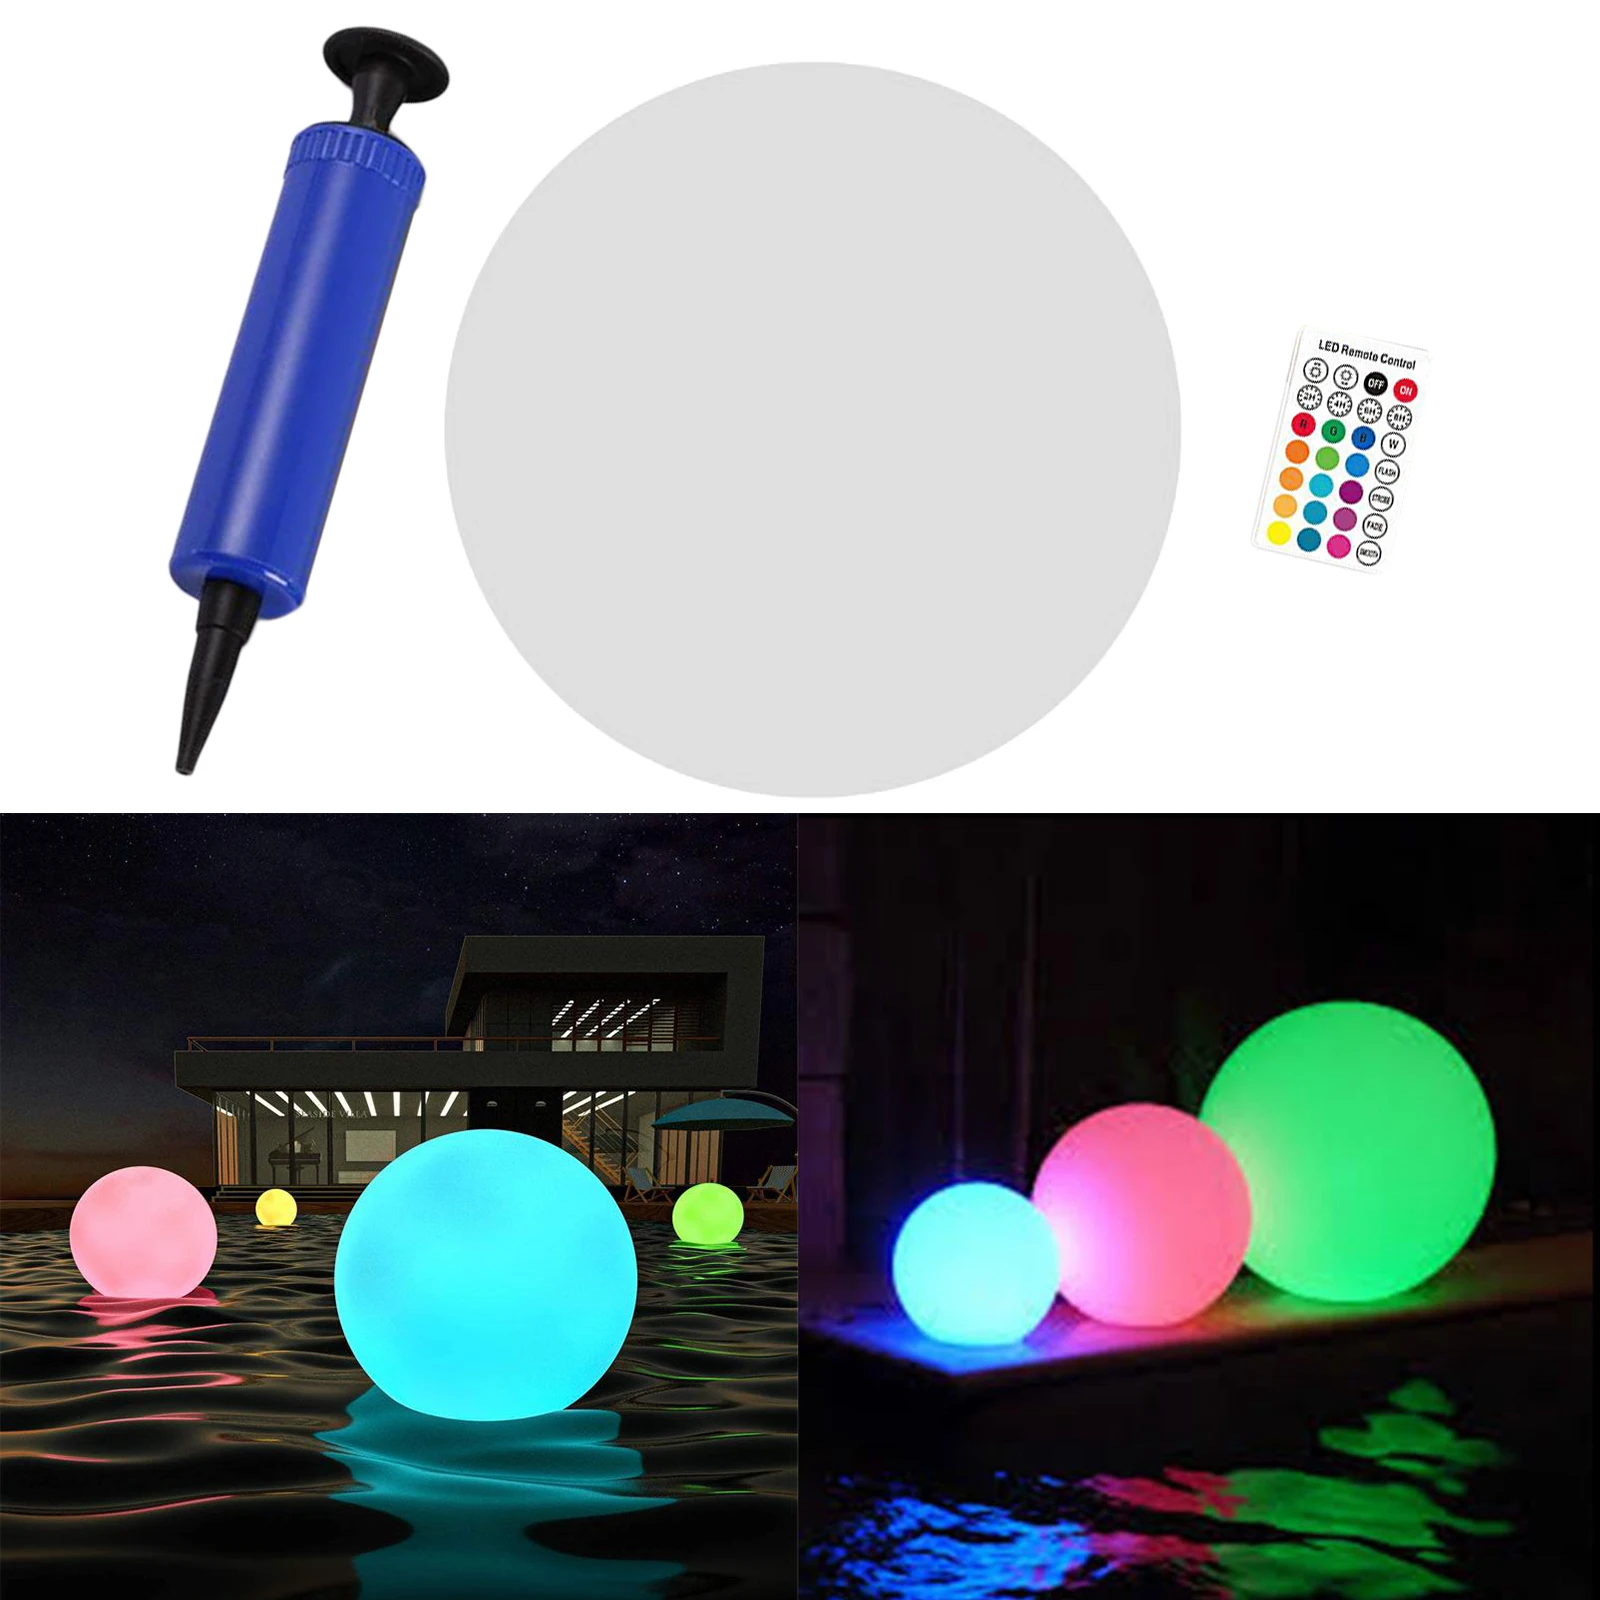 LED Light Ball Colorful IP67 Waterproof Floating Pool Lights Garden Outdoor Lamp